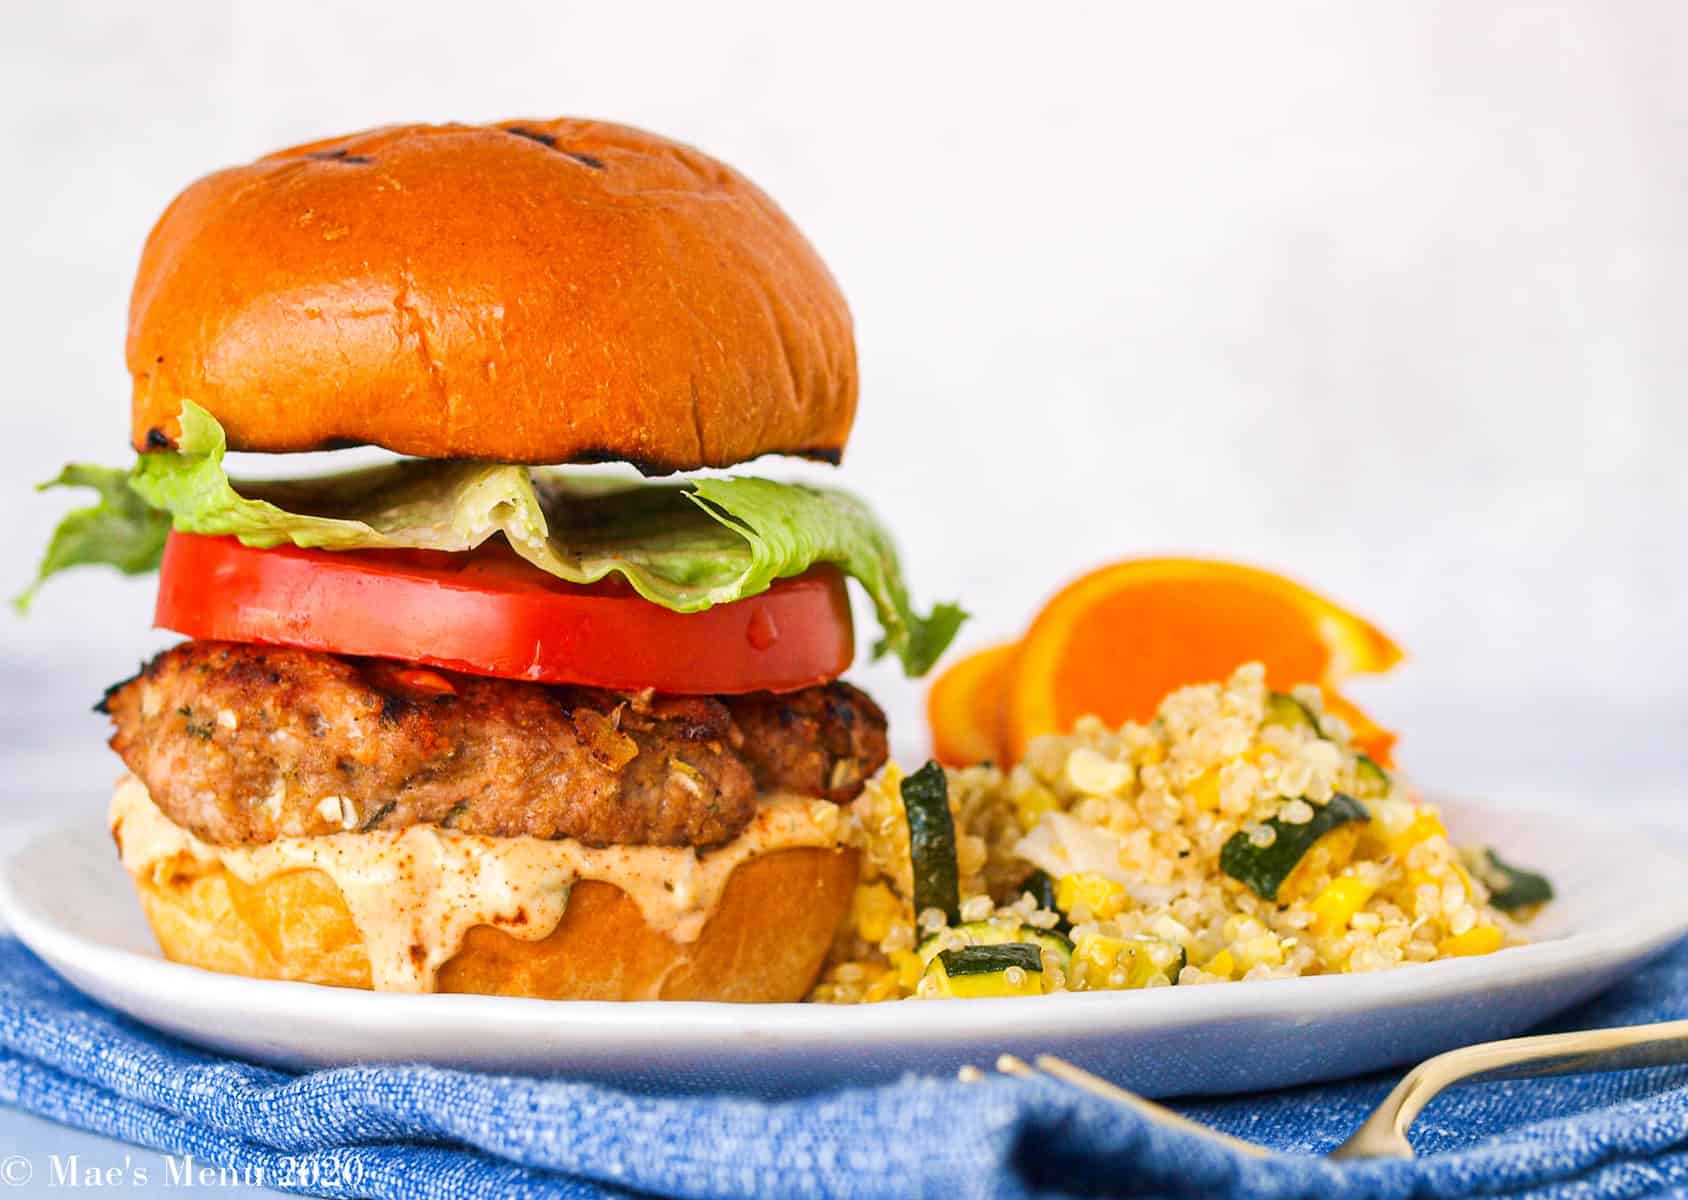 A large Jamaican jerk turkey burger on a white plate next to quinoa salad and oranges.